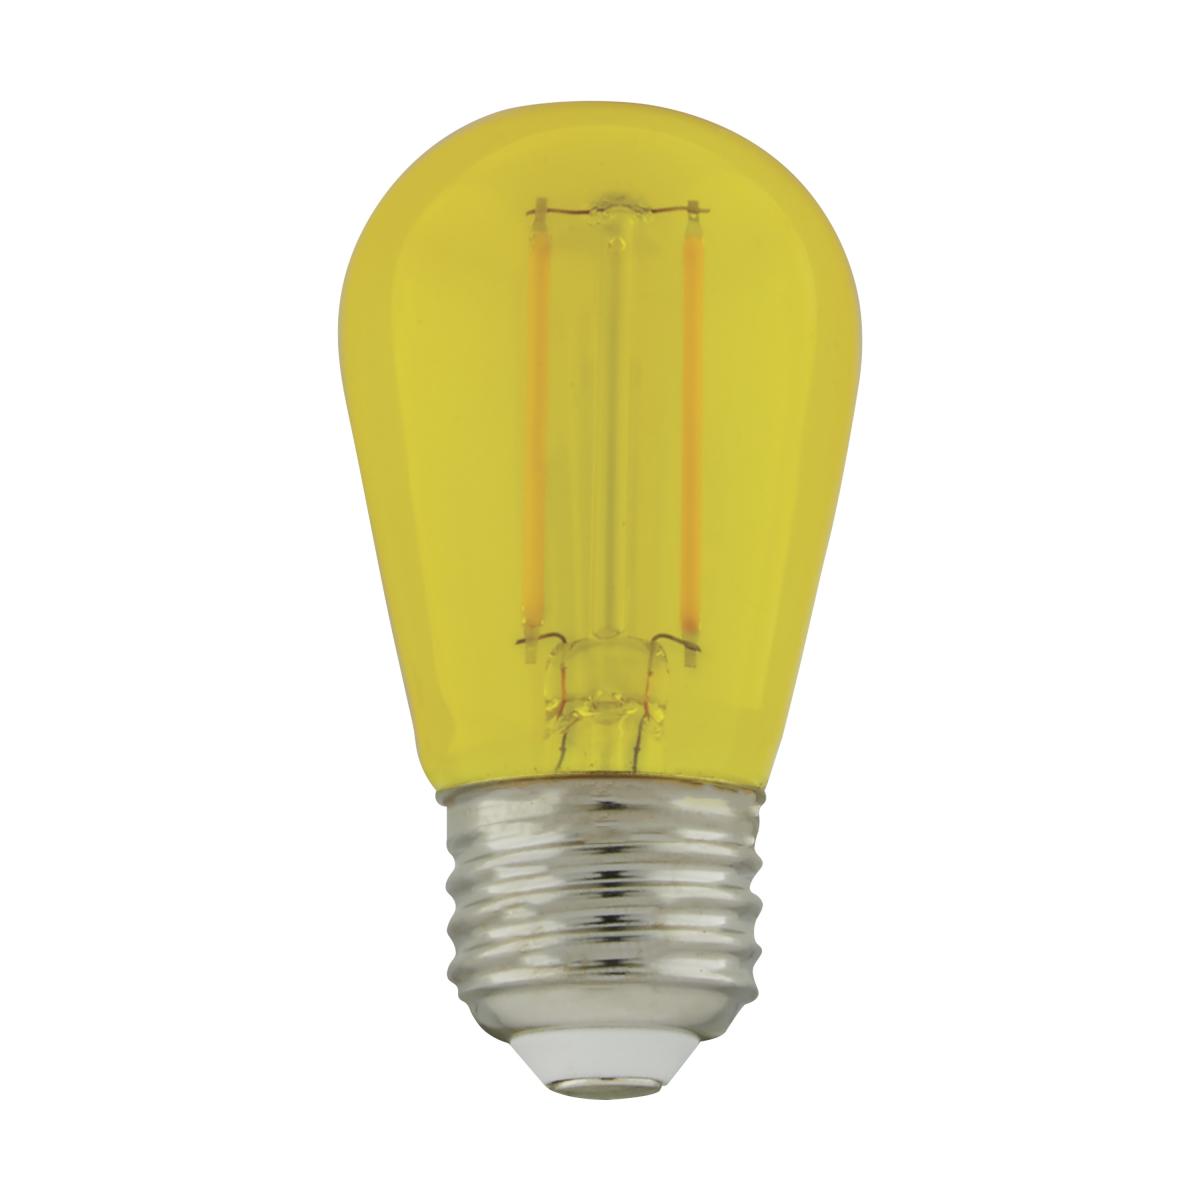 Satco S8025 1W/LED/S14/YELLOW/120V/ND/4PK 1 Watt S14 LED Filament Yellow Transparent Glass Bulb E26 Base 120 Volt Non-Dimmable Pack of 4